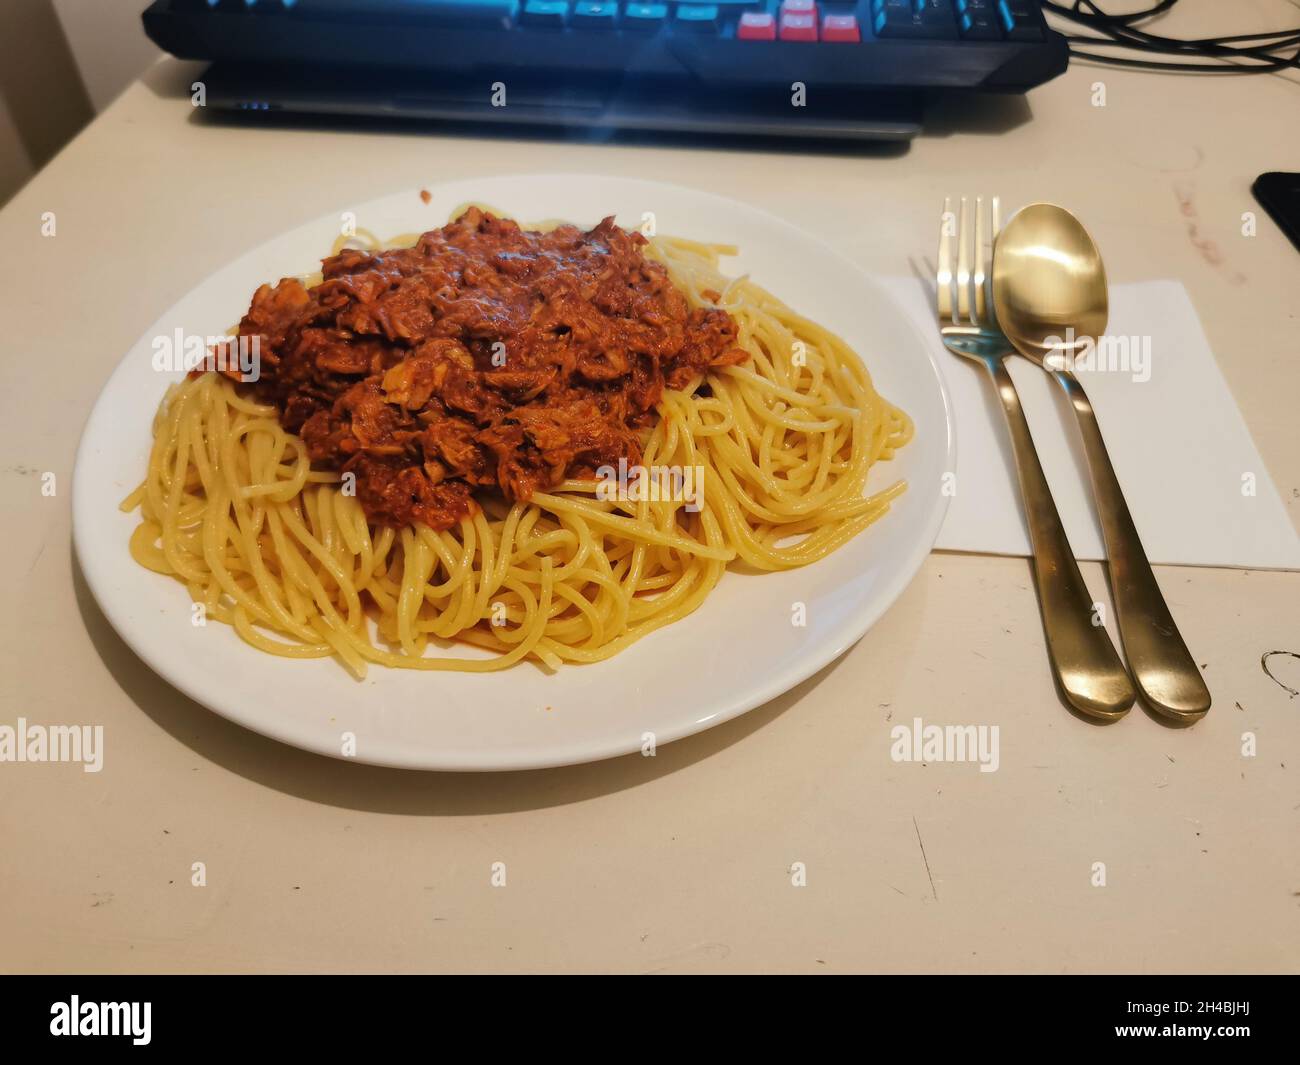 Spaghettis with a sauce on it in front of a laptop and silverware. Stock Photo